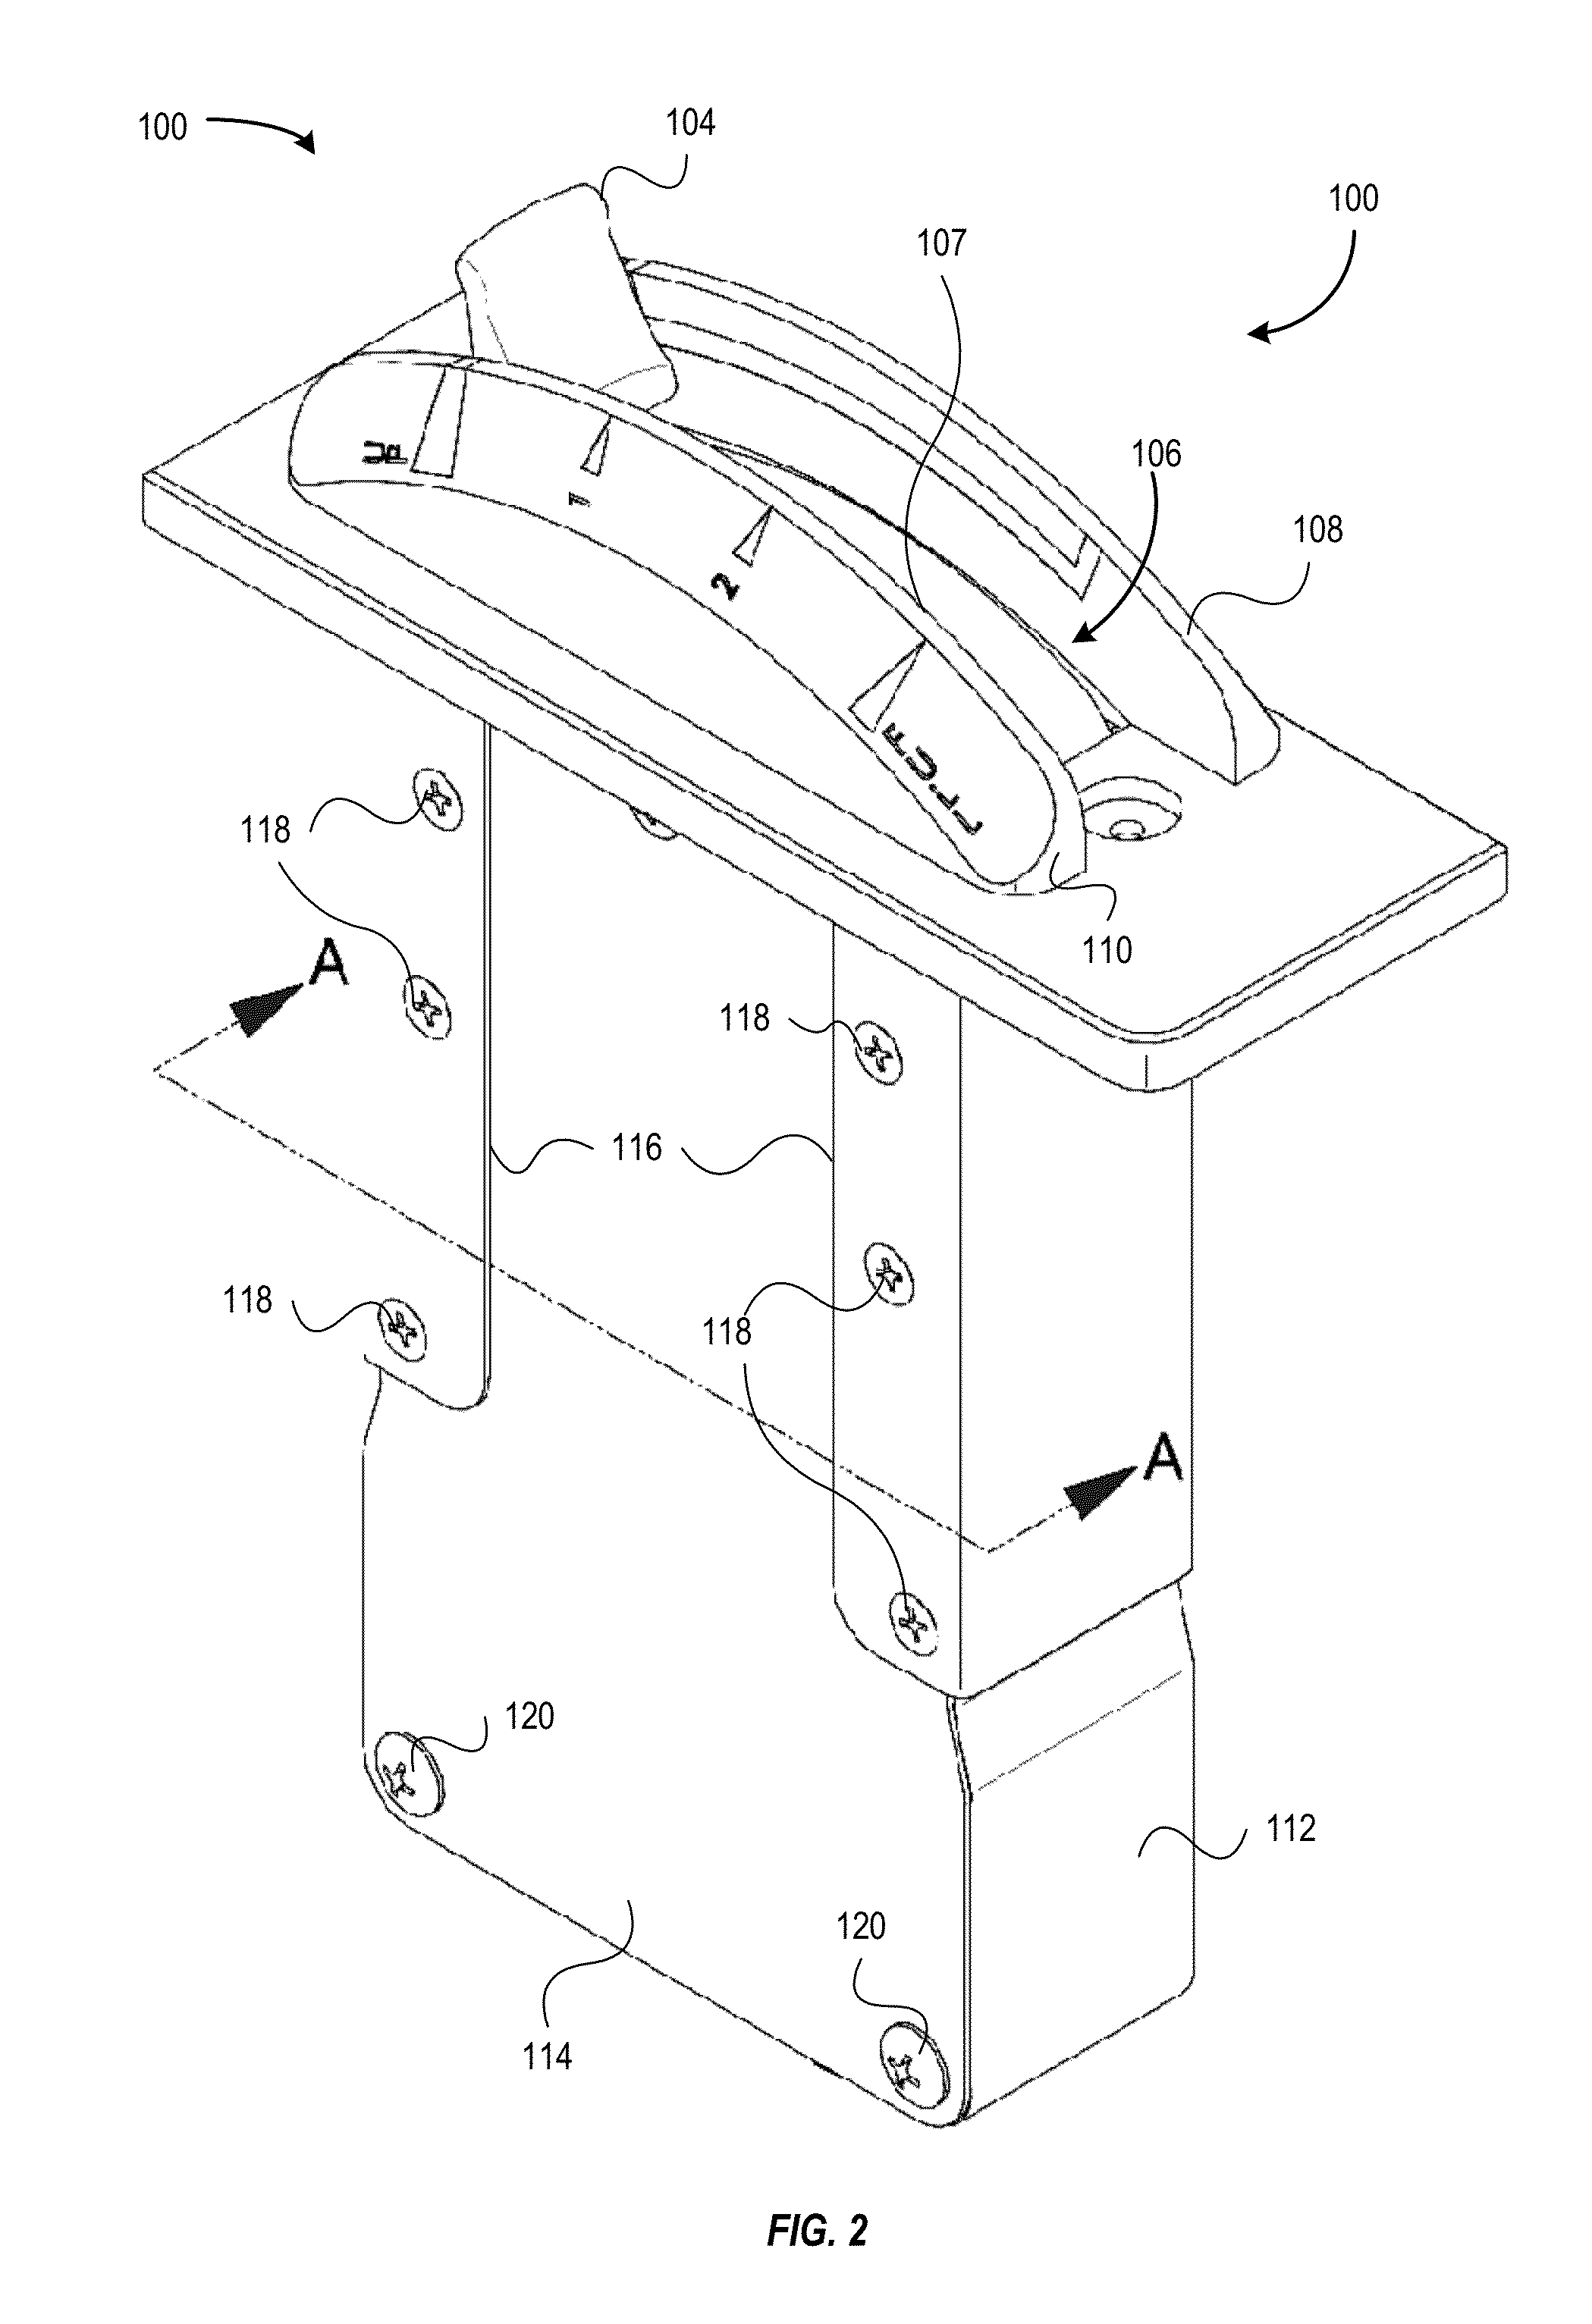 Self-centering aircraft flap position command apparatus